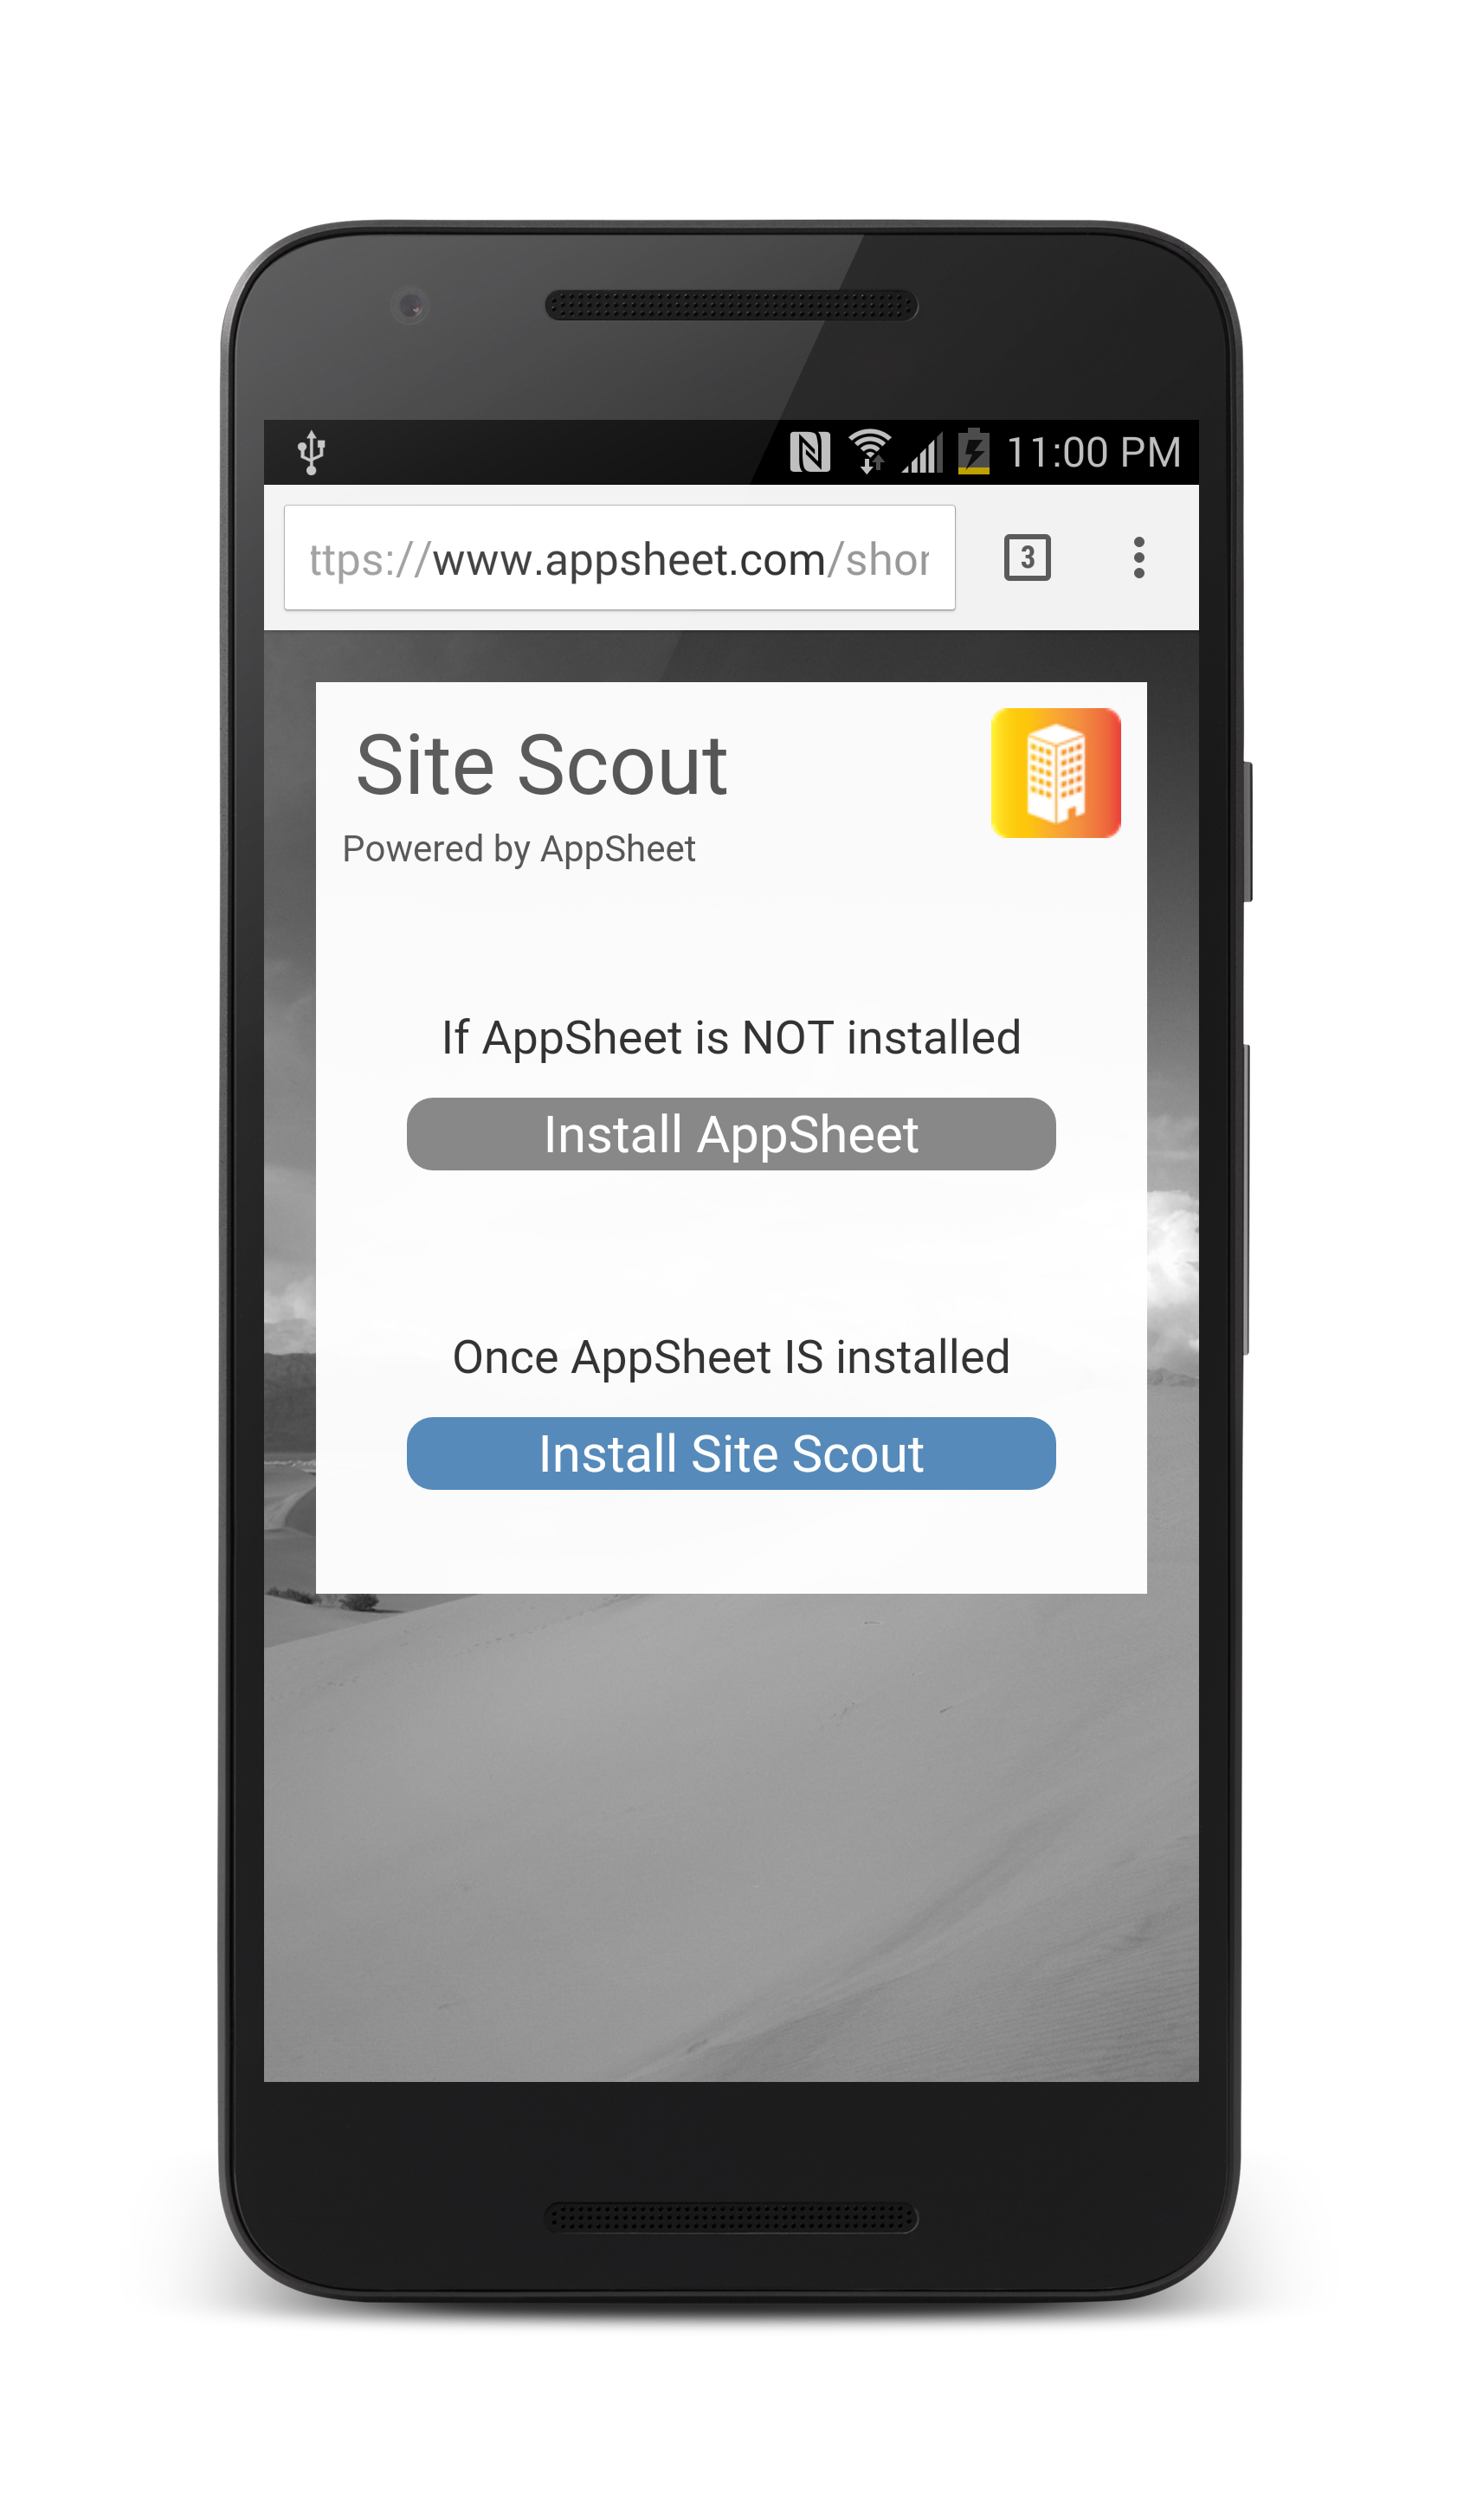 Page with option to install AppSheet or the Site Scout app